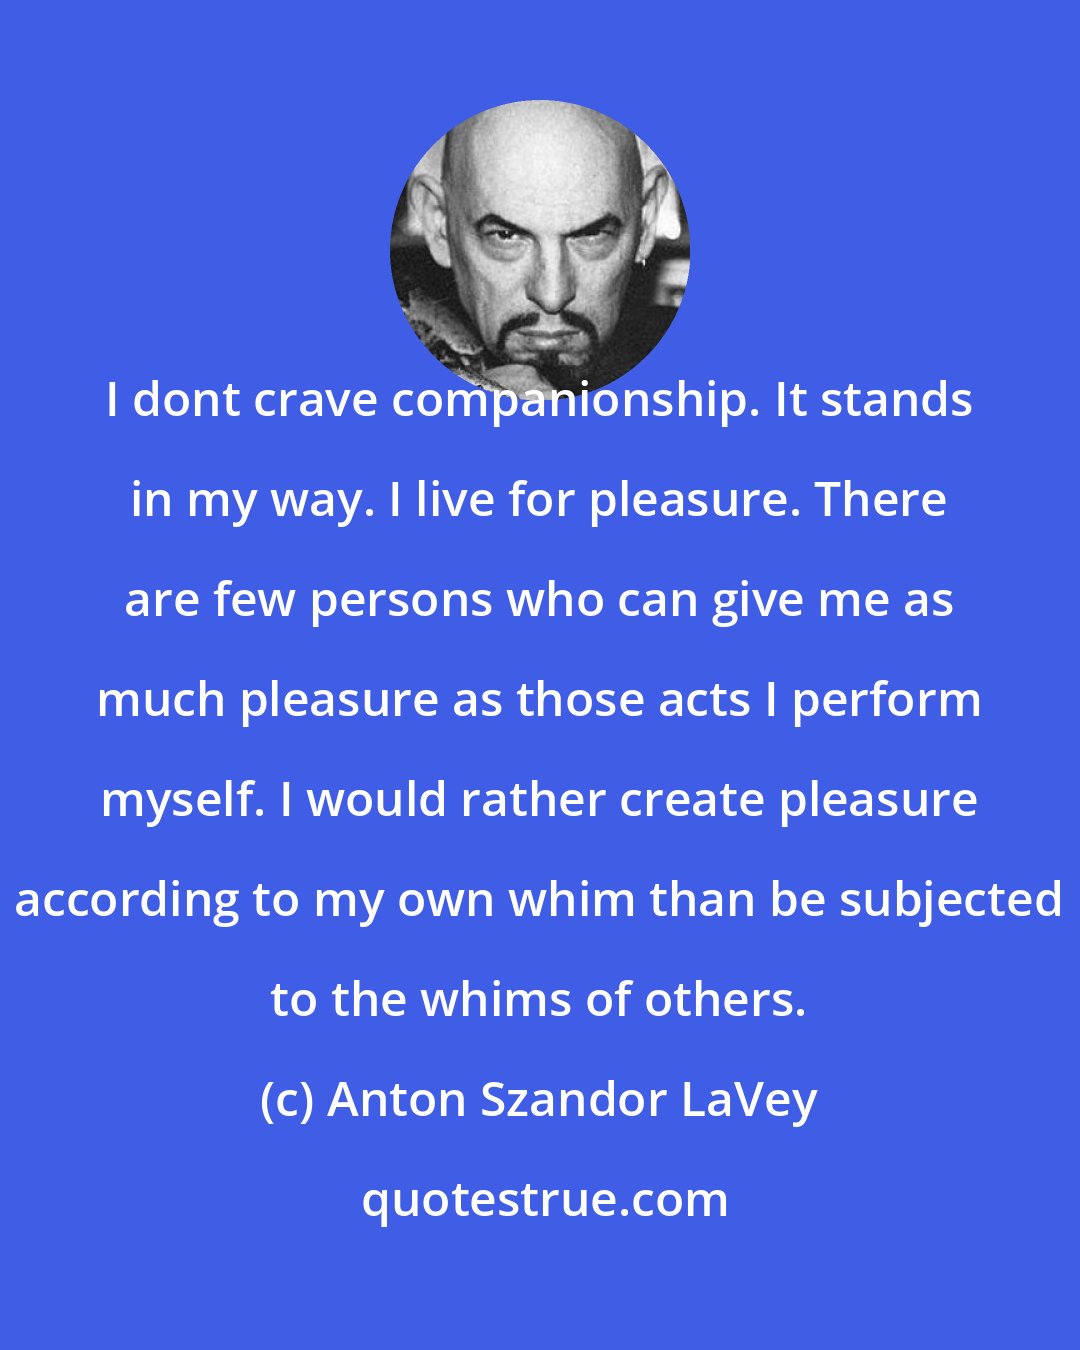 Anton Szandor LaVey: I dont crave companionship. It stands in my way. I live for pleasure. There are few persons who can give me as much pleasure as those acts I perform myself. I would rather create pleasure according to my own whim than be subjected to the whims of others.